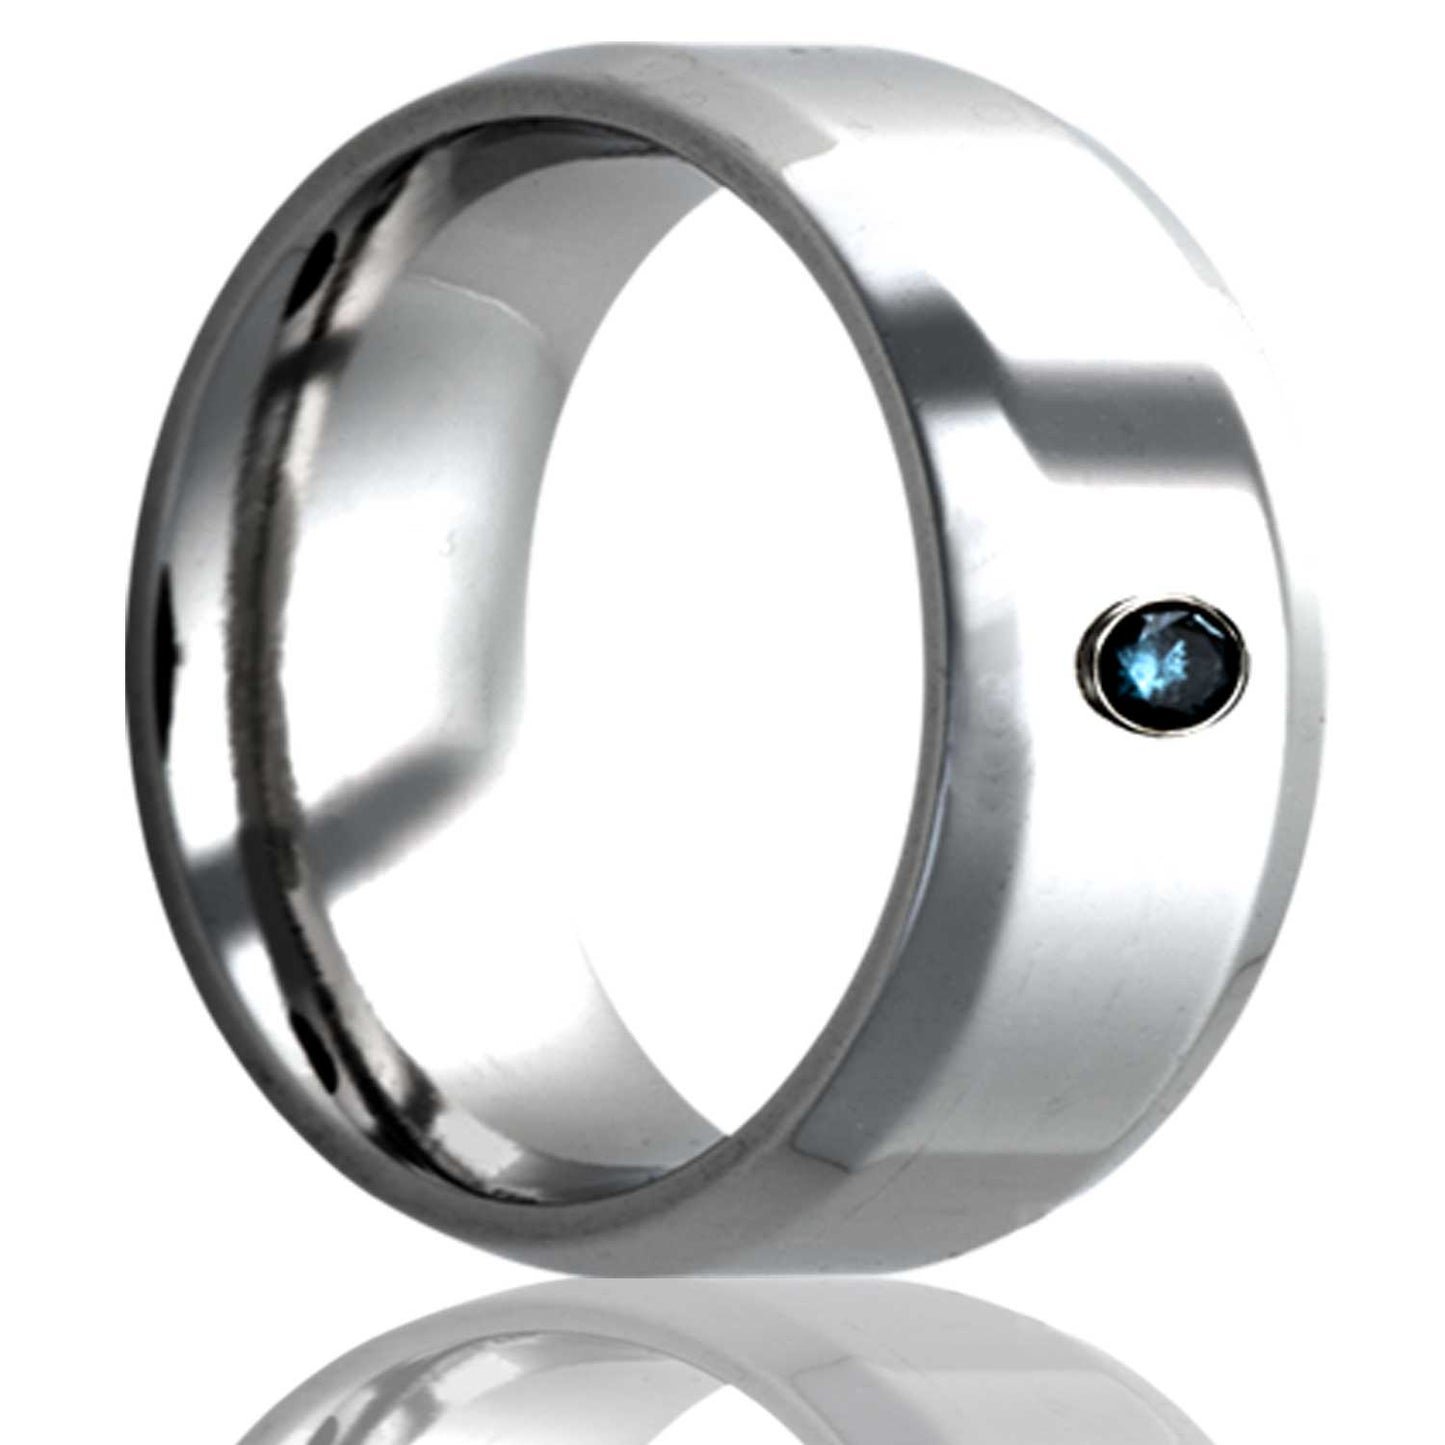 A cobalt wedding band with beveled edges & blue diamond displayed on a neutral white background.